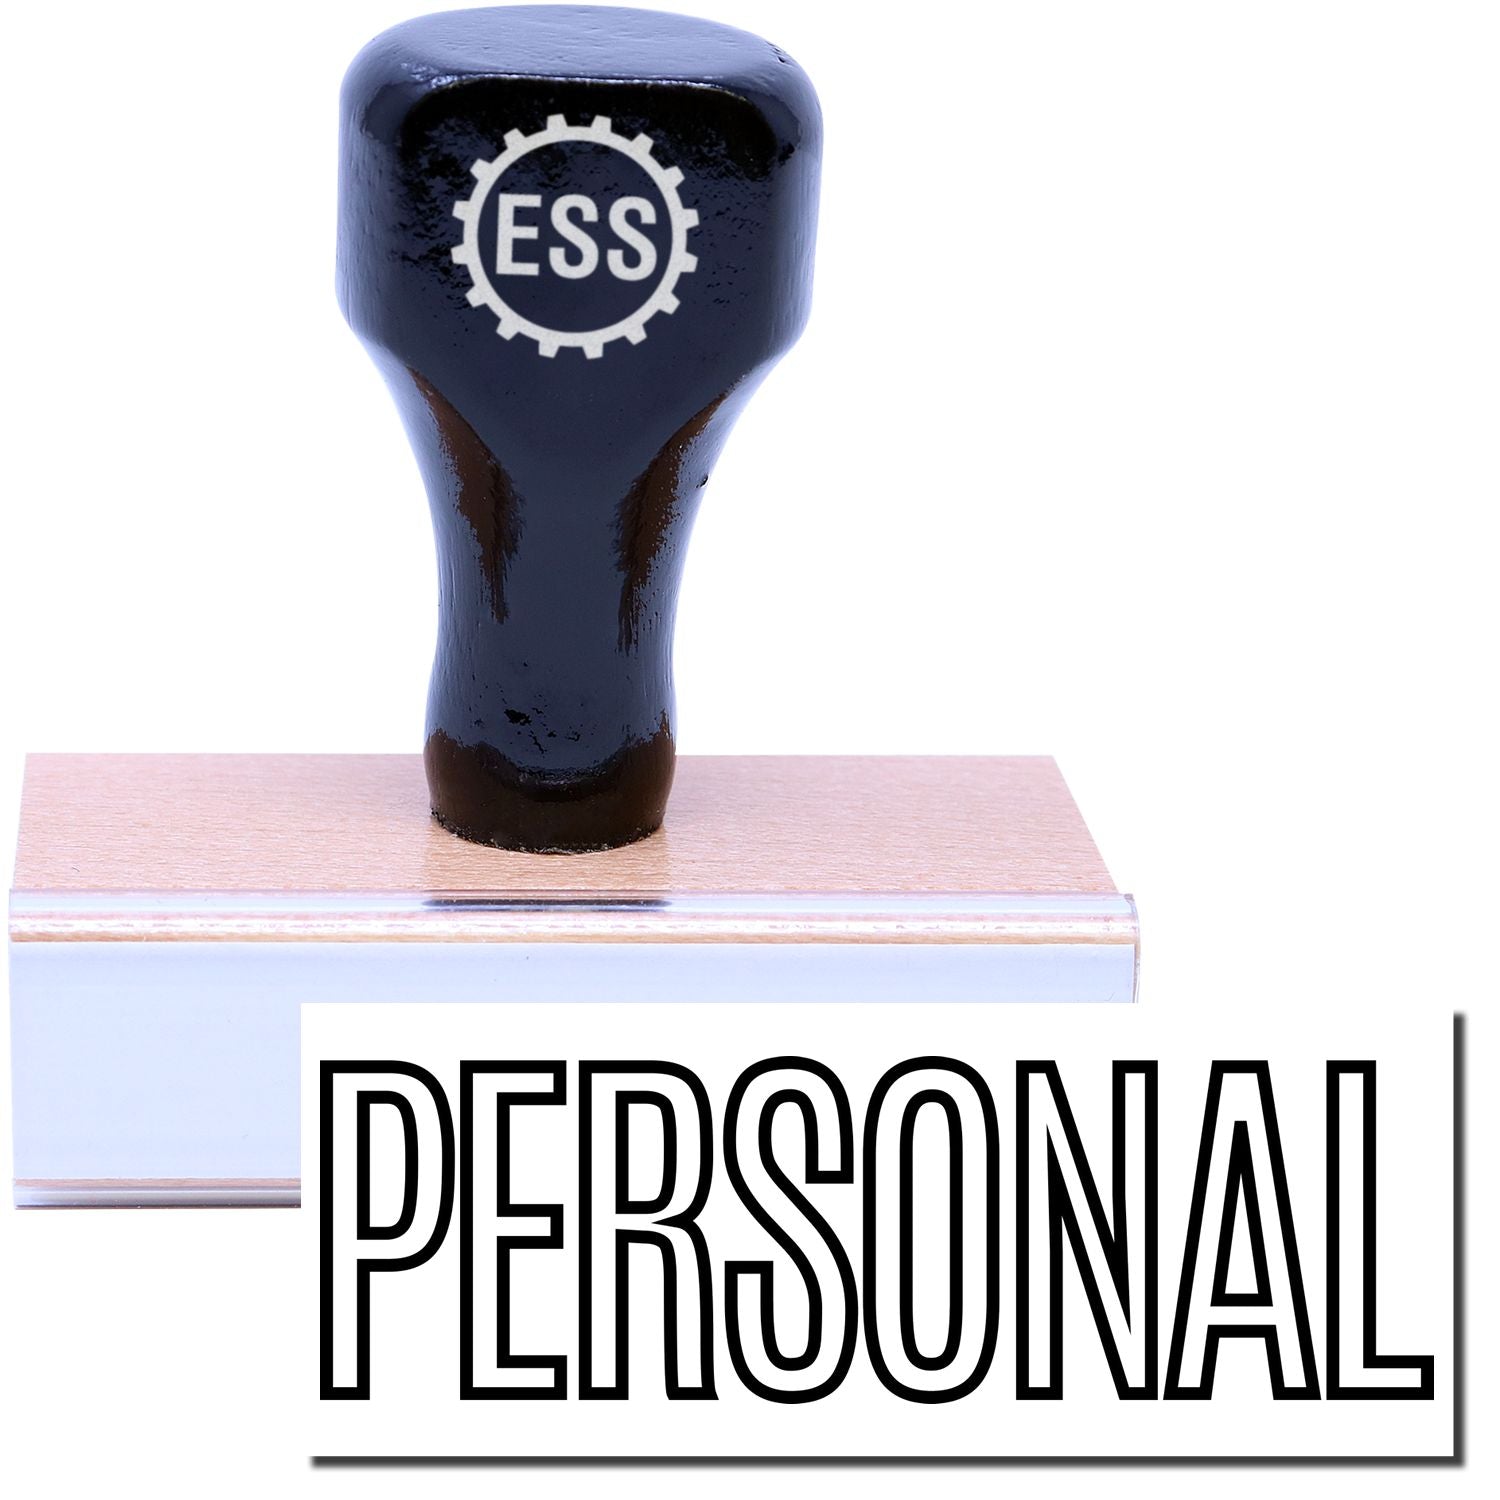 A stock office rubber stamp with a stamped image showing how the text "PERSONAL" in a large outline font is displayed after stamping.